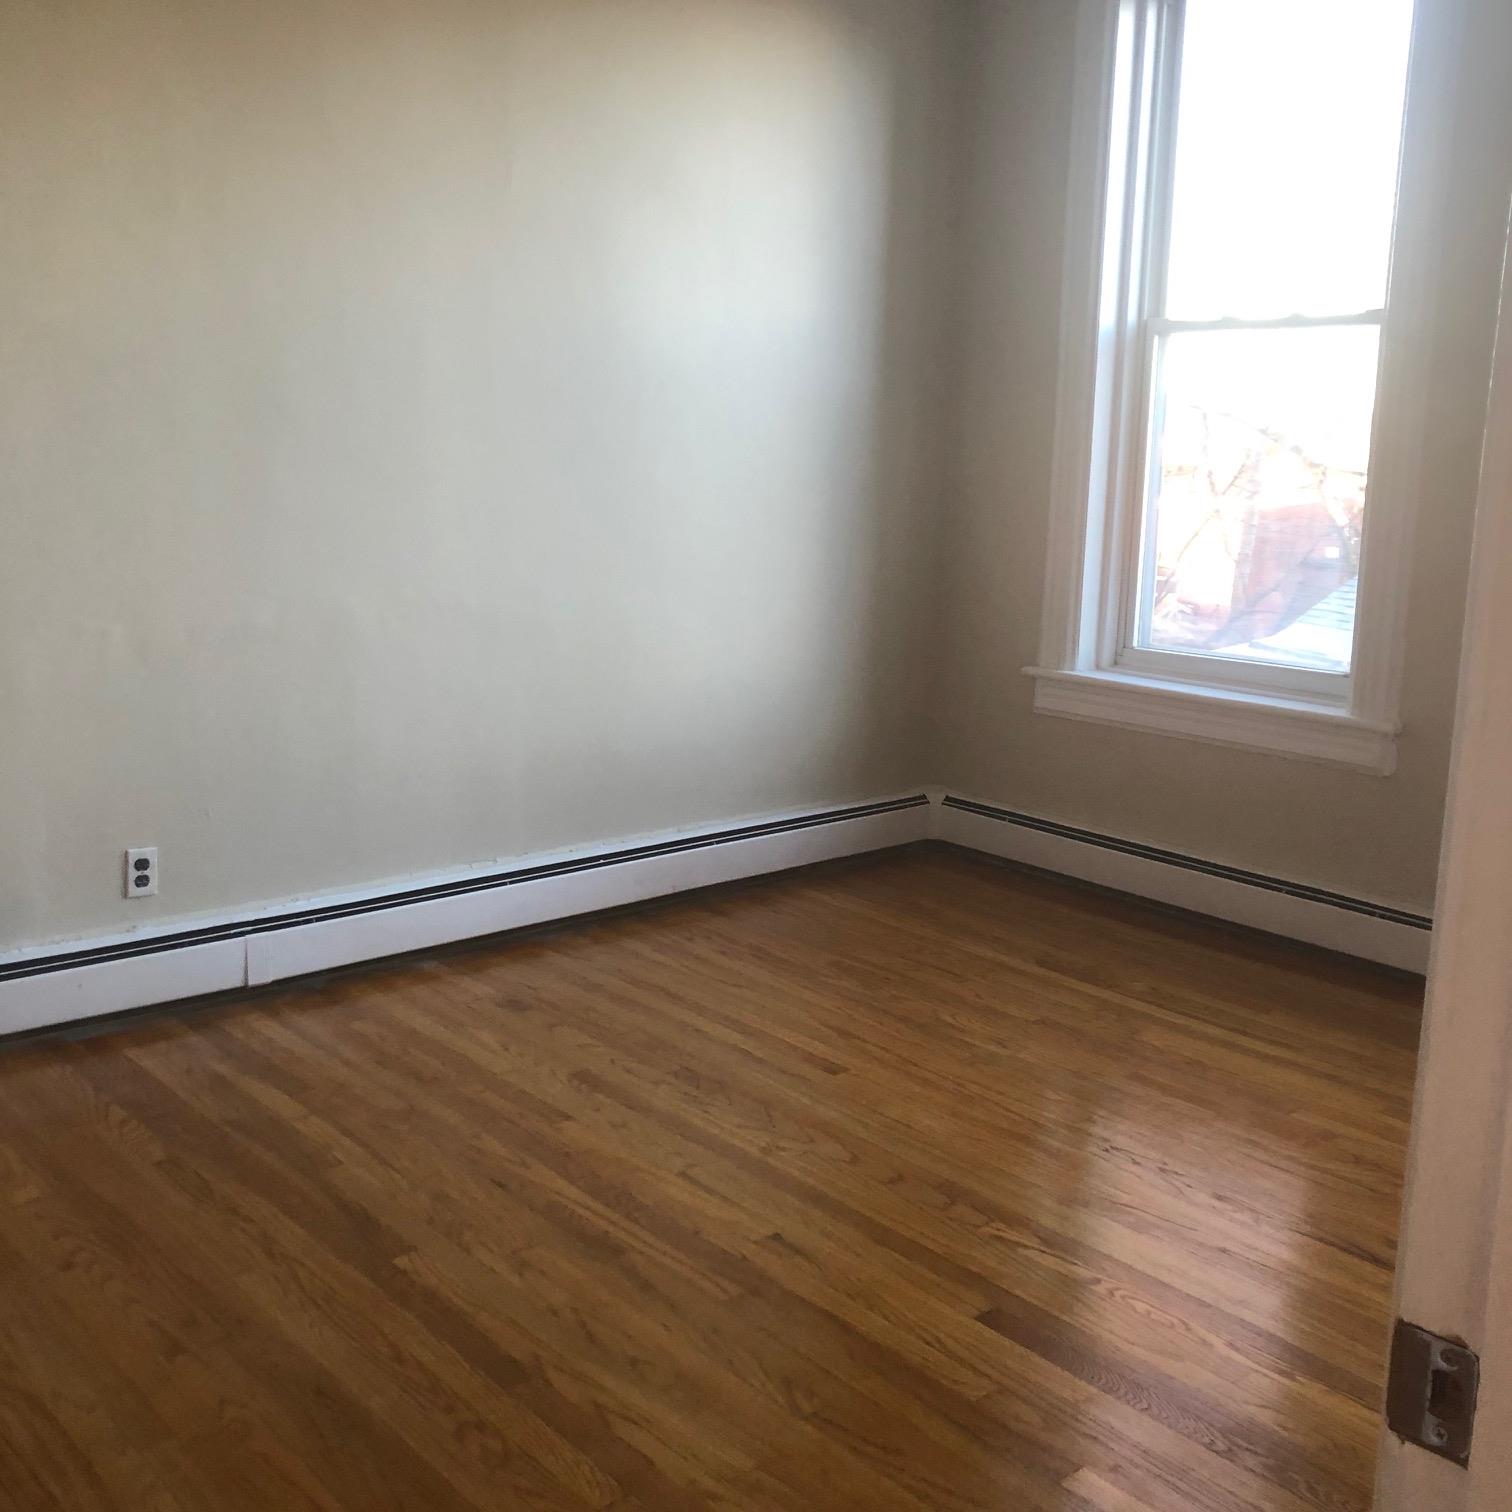 NO FEE RENTAL!!!!  Bright and sunny 1 bedroom apt in really quiet nice part of Bayonne.  The bedroom has a huge closet that is the size of a den.  Directly across the street from the 8th Street Light Rail, easy access to Jersey city, Hoboken, NYC.  Lots of Street parking available.